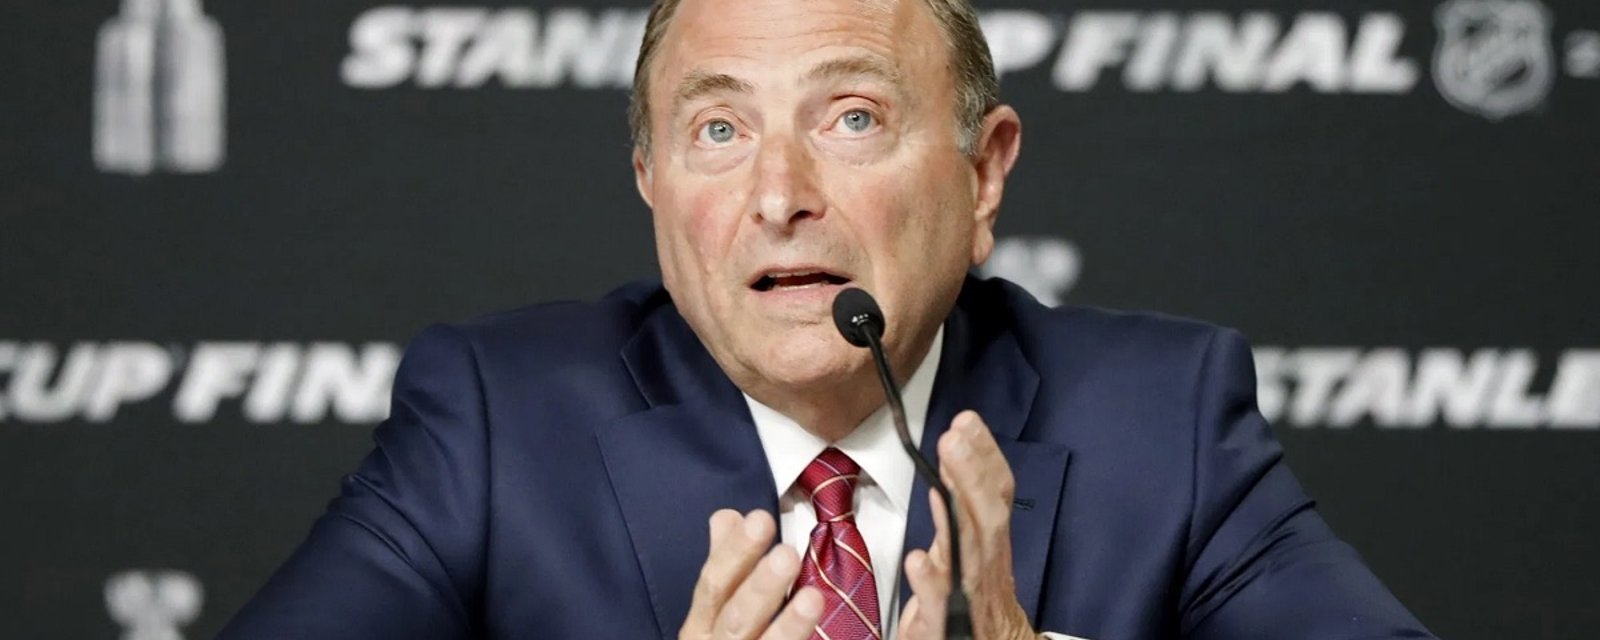 All Canadian Division rumors gain steam after Gary Bettman dodges questions on the topic.